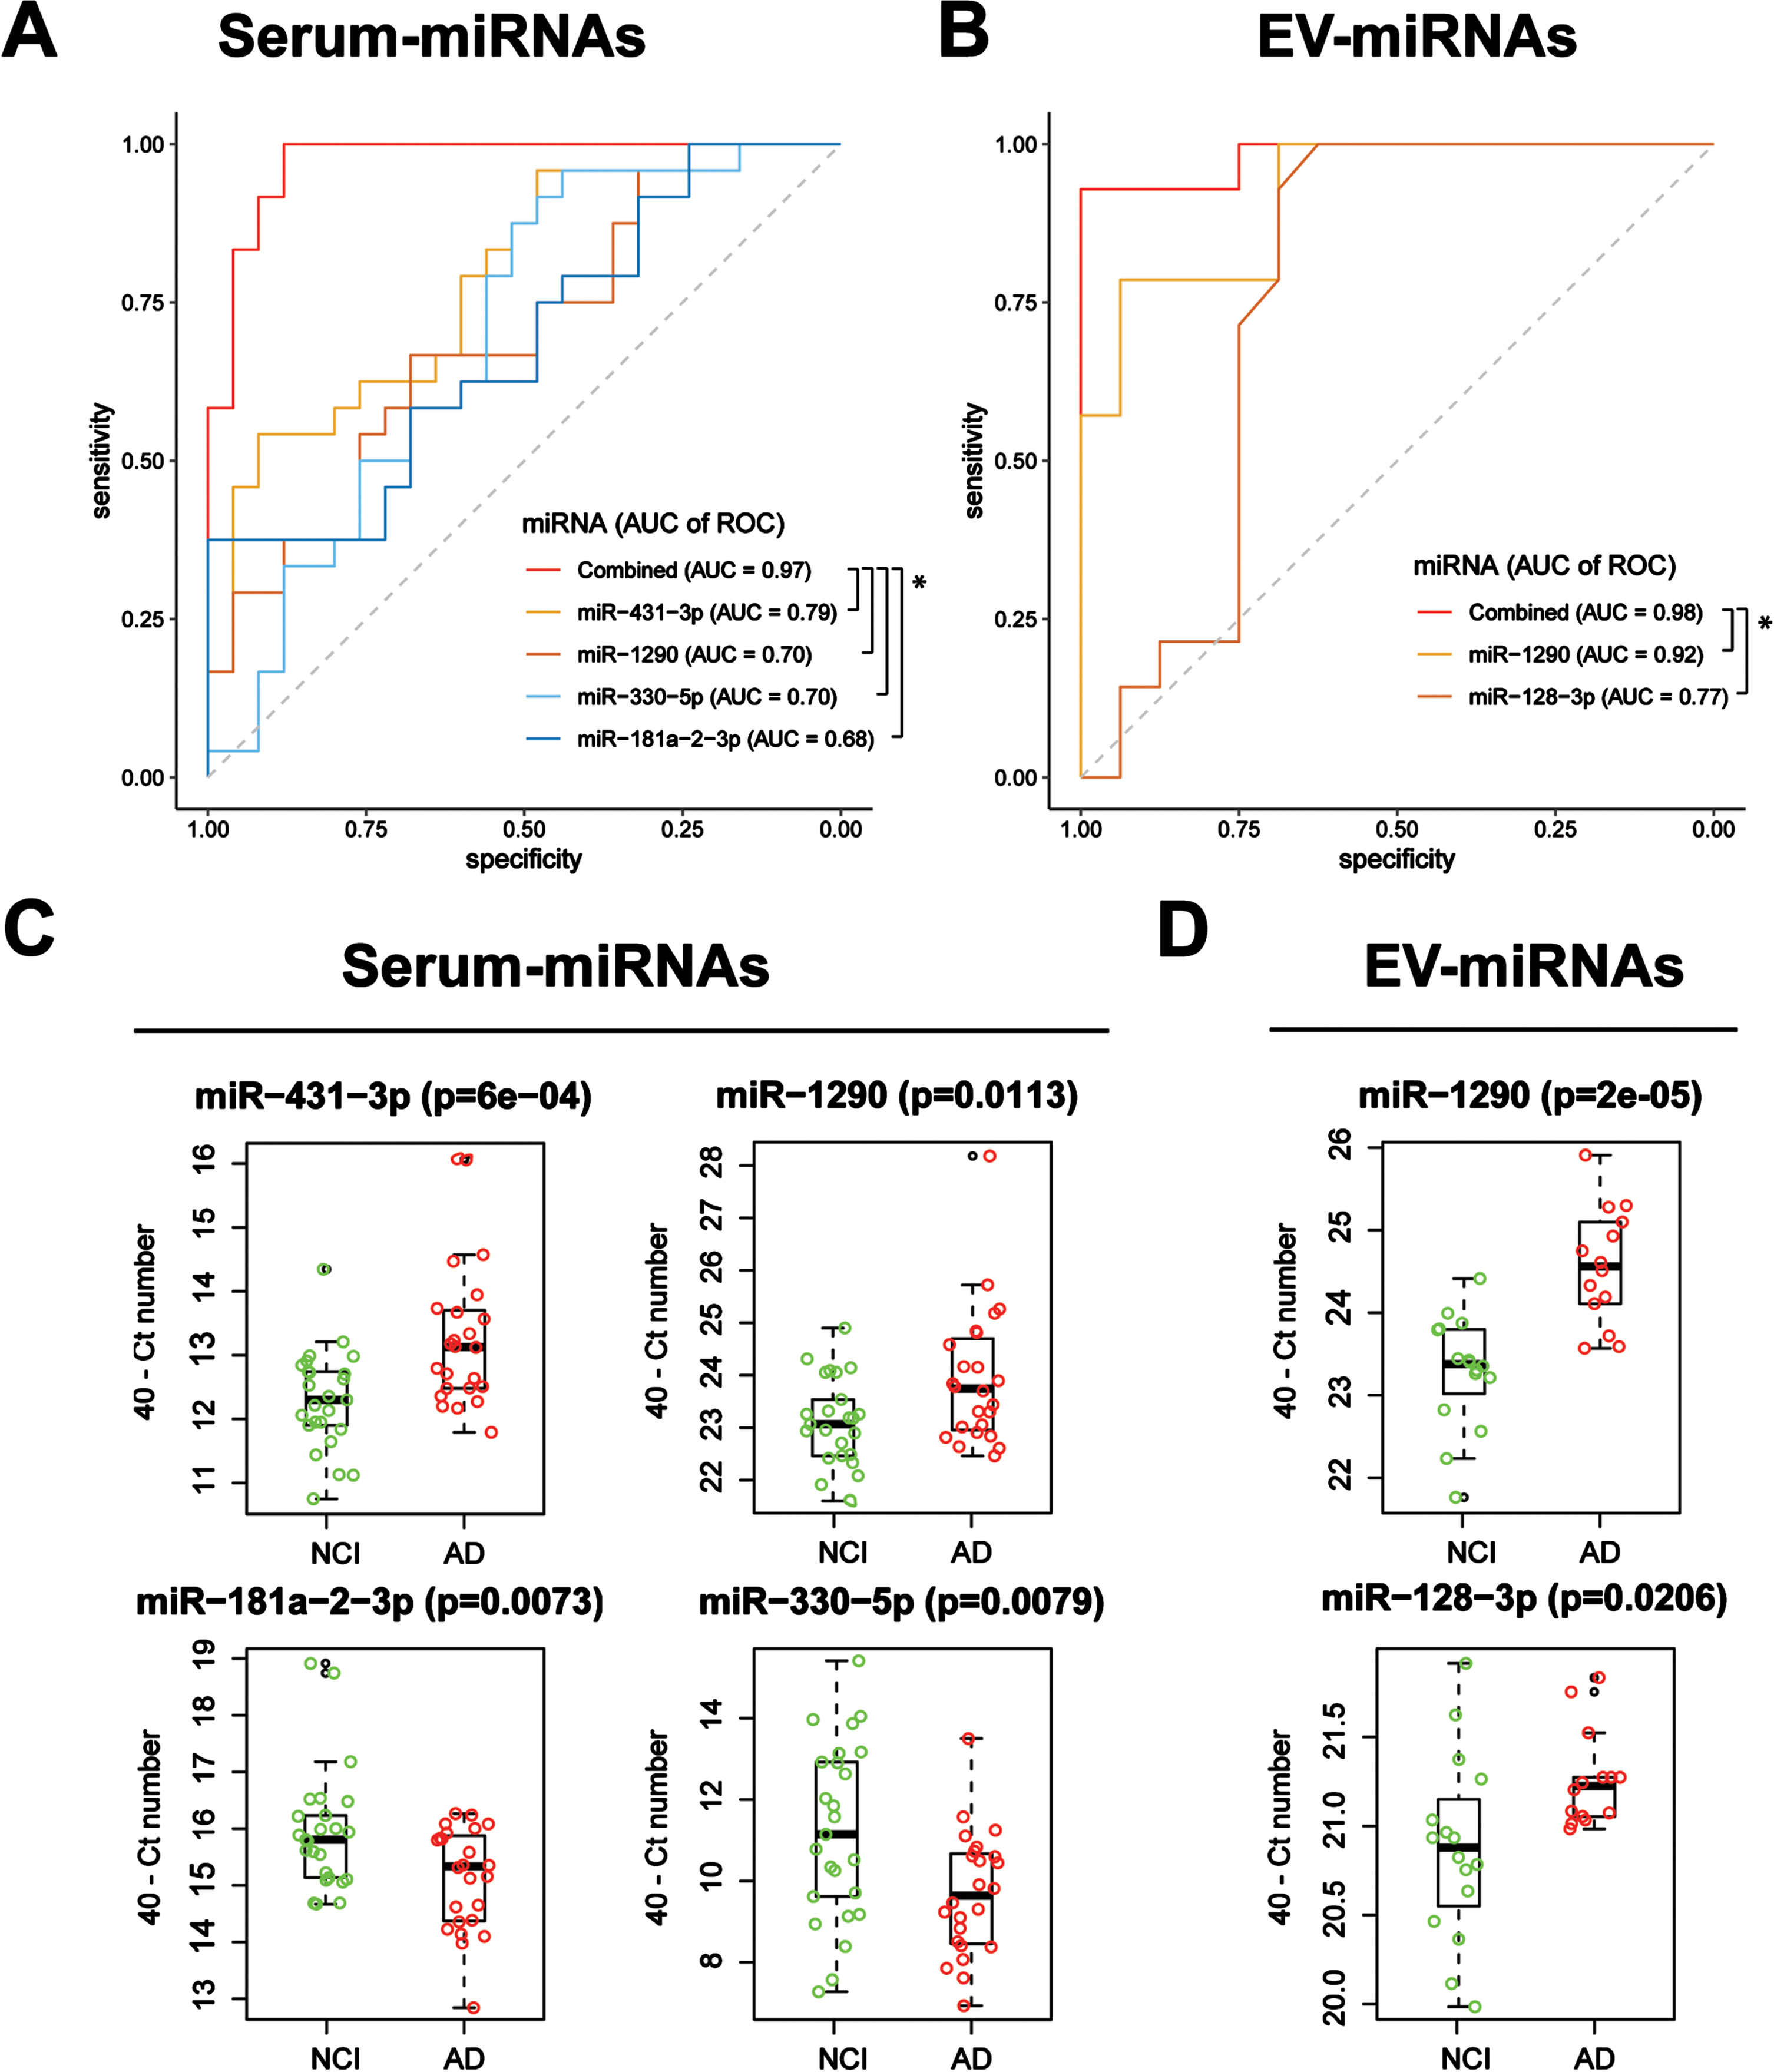 Expression levels and AD classification potentials of serum- and EV-miRNAs. ROC analyses of AD versus NCI classification performance of logistic regression models obtained using (A) serum-miRNAs and (B) EV-miRNAs identified by stepwise regression. Performance improved when more than one miRNA was used, both for serum and EV miRNAs (*p < 0.05, likelihood ratio tests). Boxplots show 40 – Ct expression levels of (C) serum and (D) EV miRNAs in AD patients versus NCI controls.